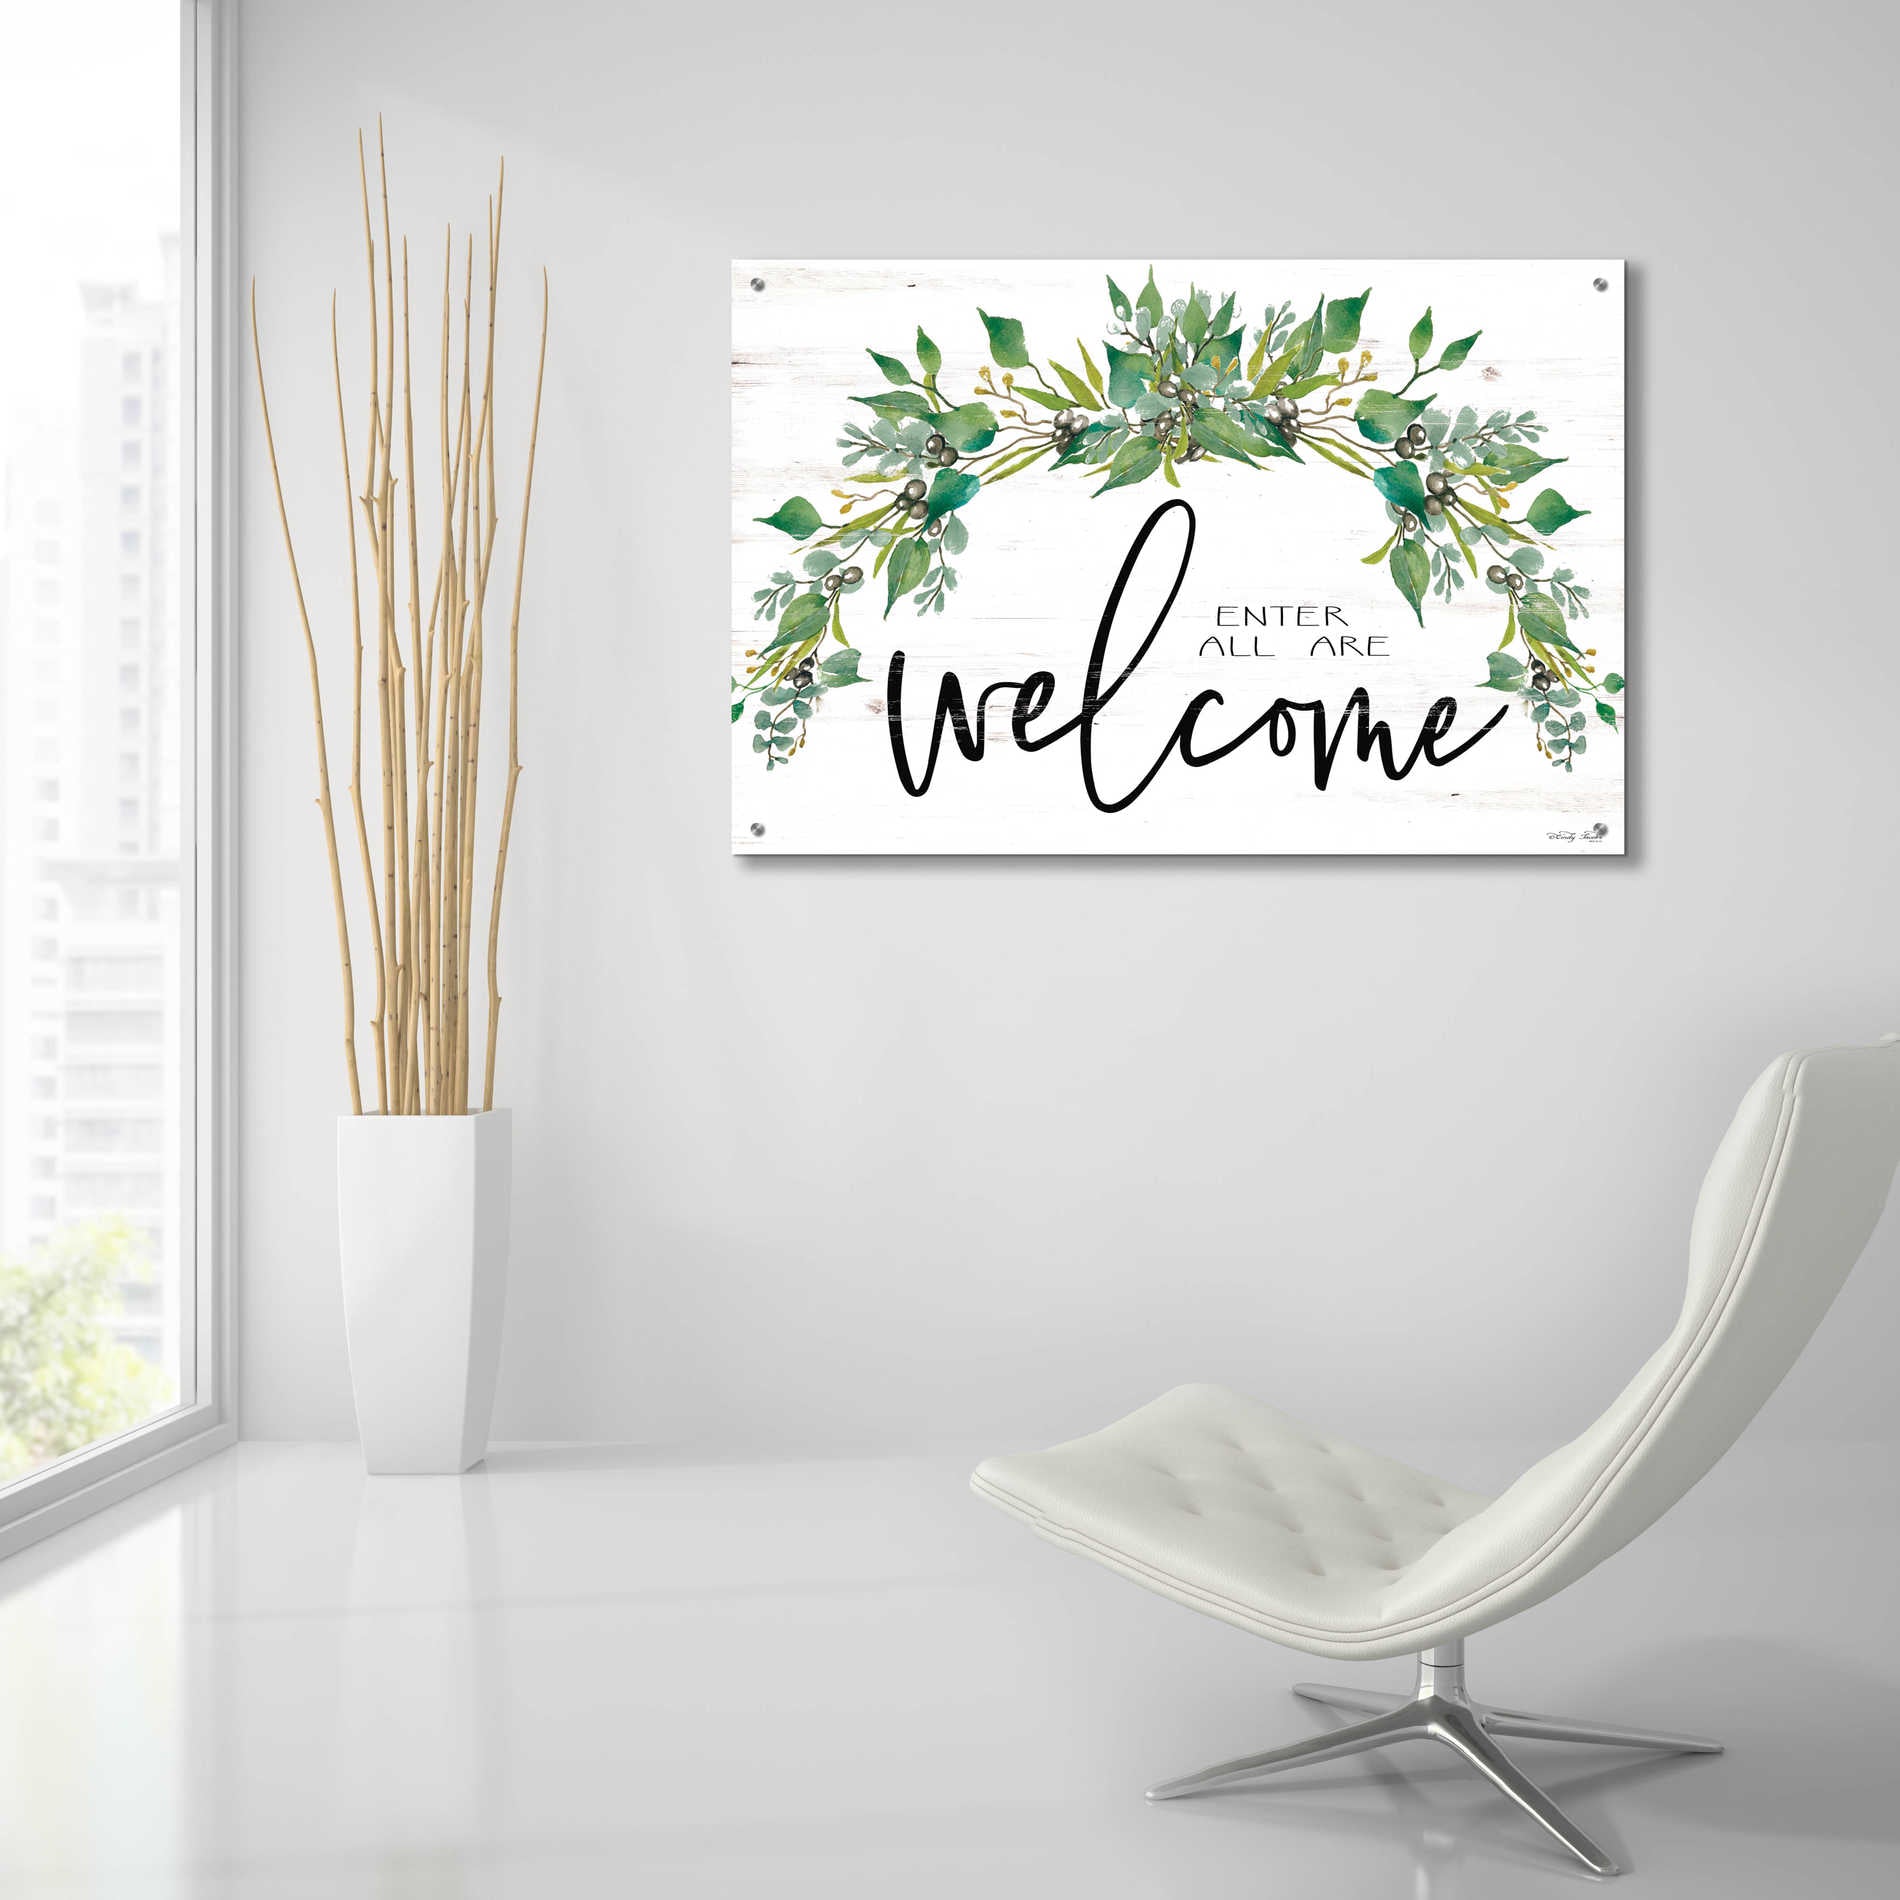 Epic Art 'Enter All Are Welcome' by Cindy Jacobs, Acrylic Glass Wall Art,36x24